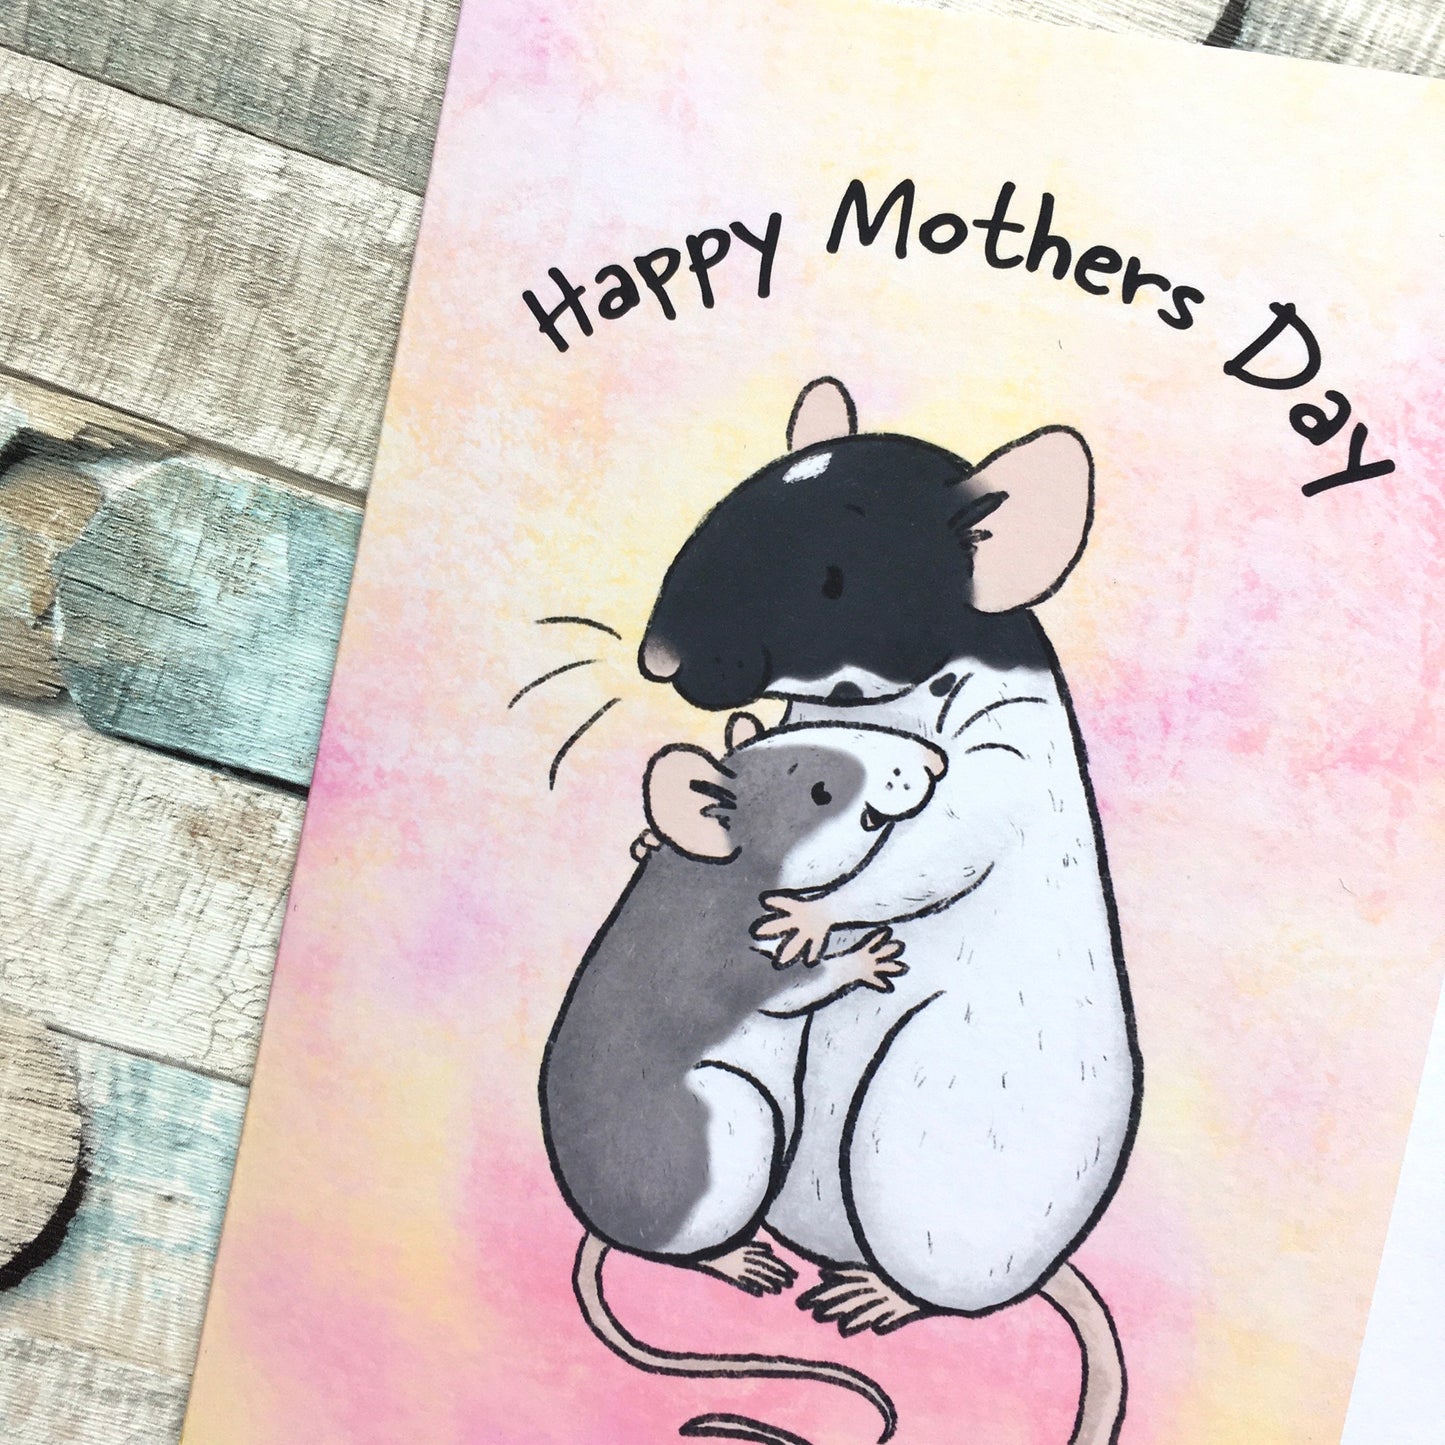 Happy Mothers Day Pet Rat Blank A6 Sized Greeting Card, Rat Mum Gift, Fancy Rat Mum Gift Card